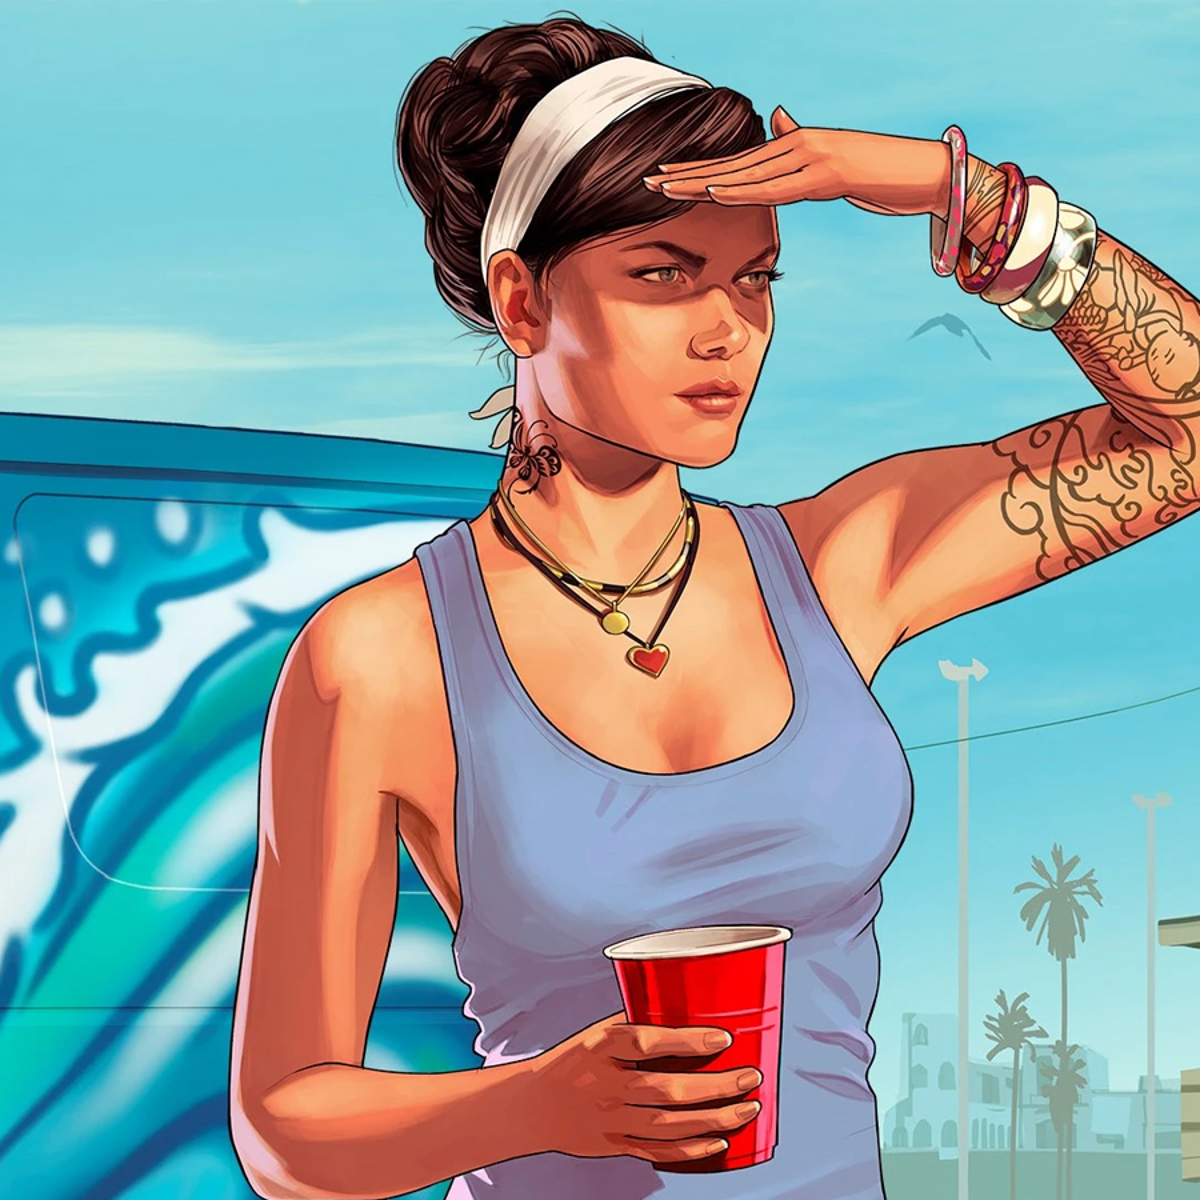 Hackers Leaked 'Grand Theft Auto' Footage, Rockstar Games Says - WSJ